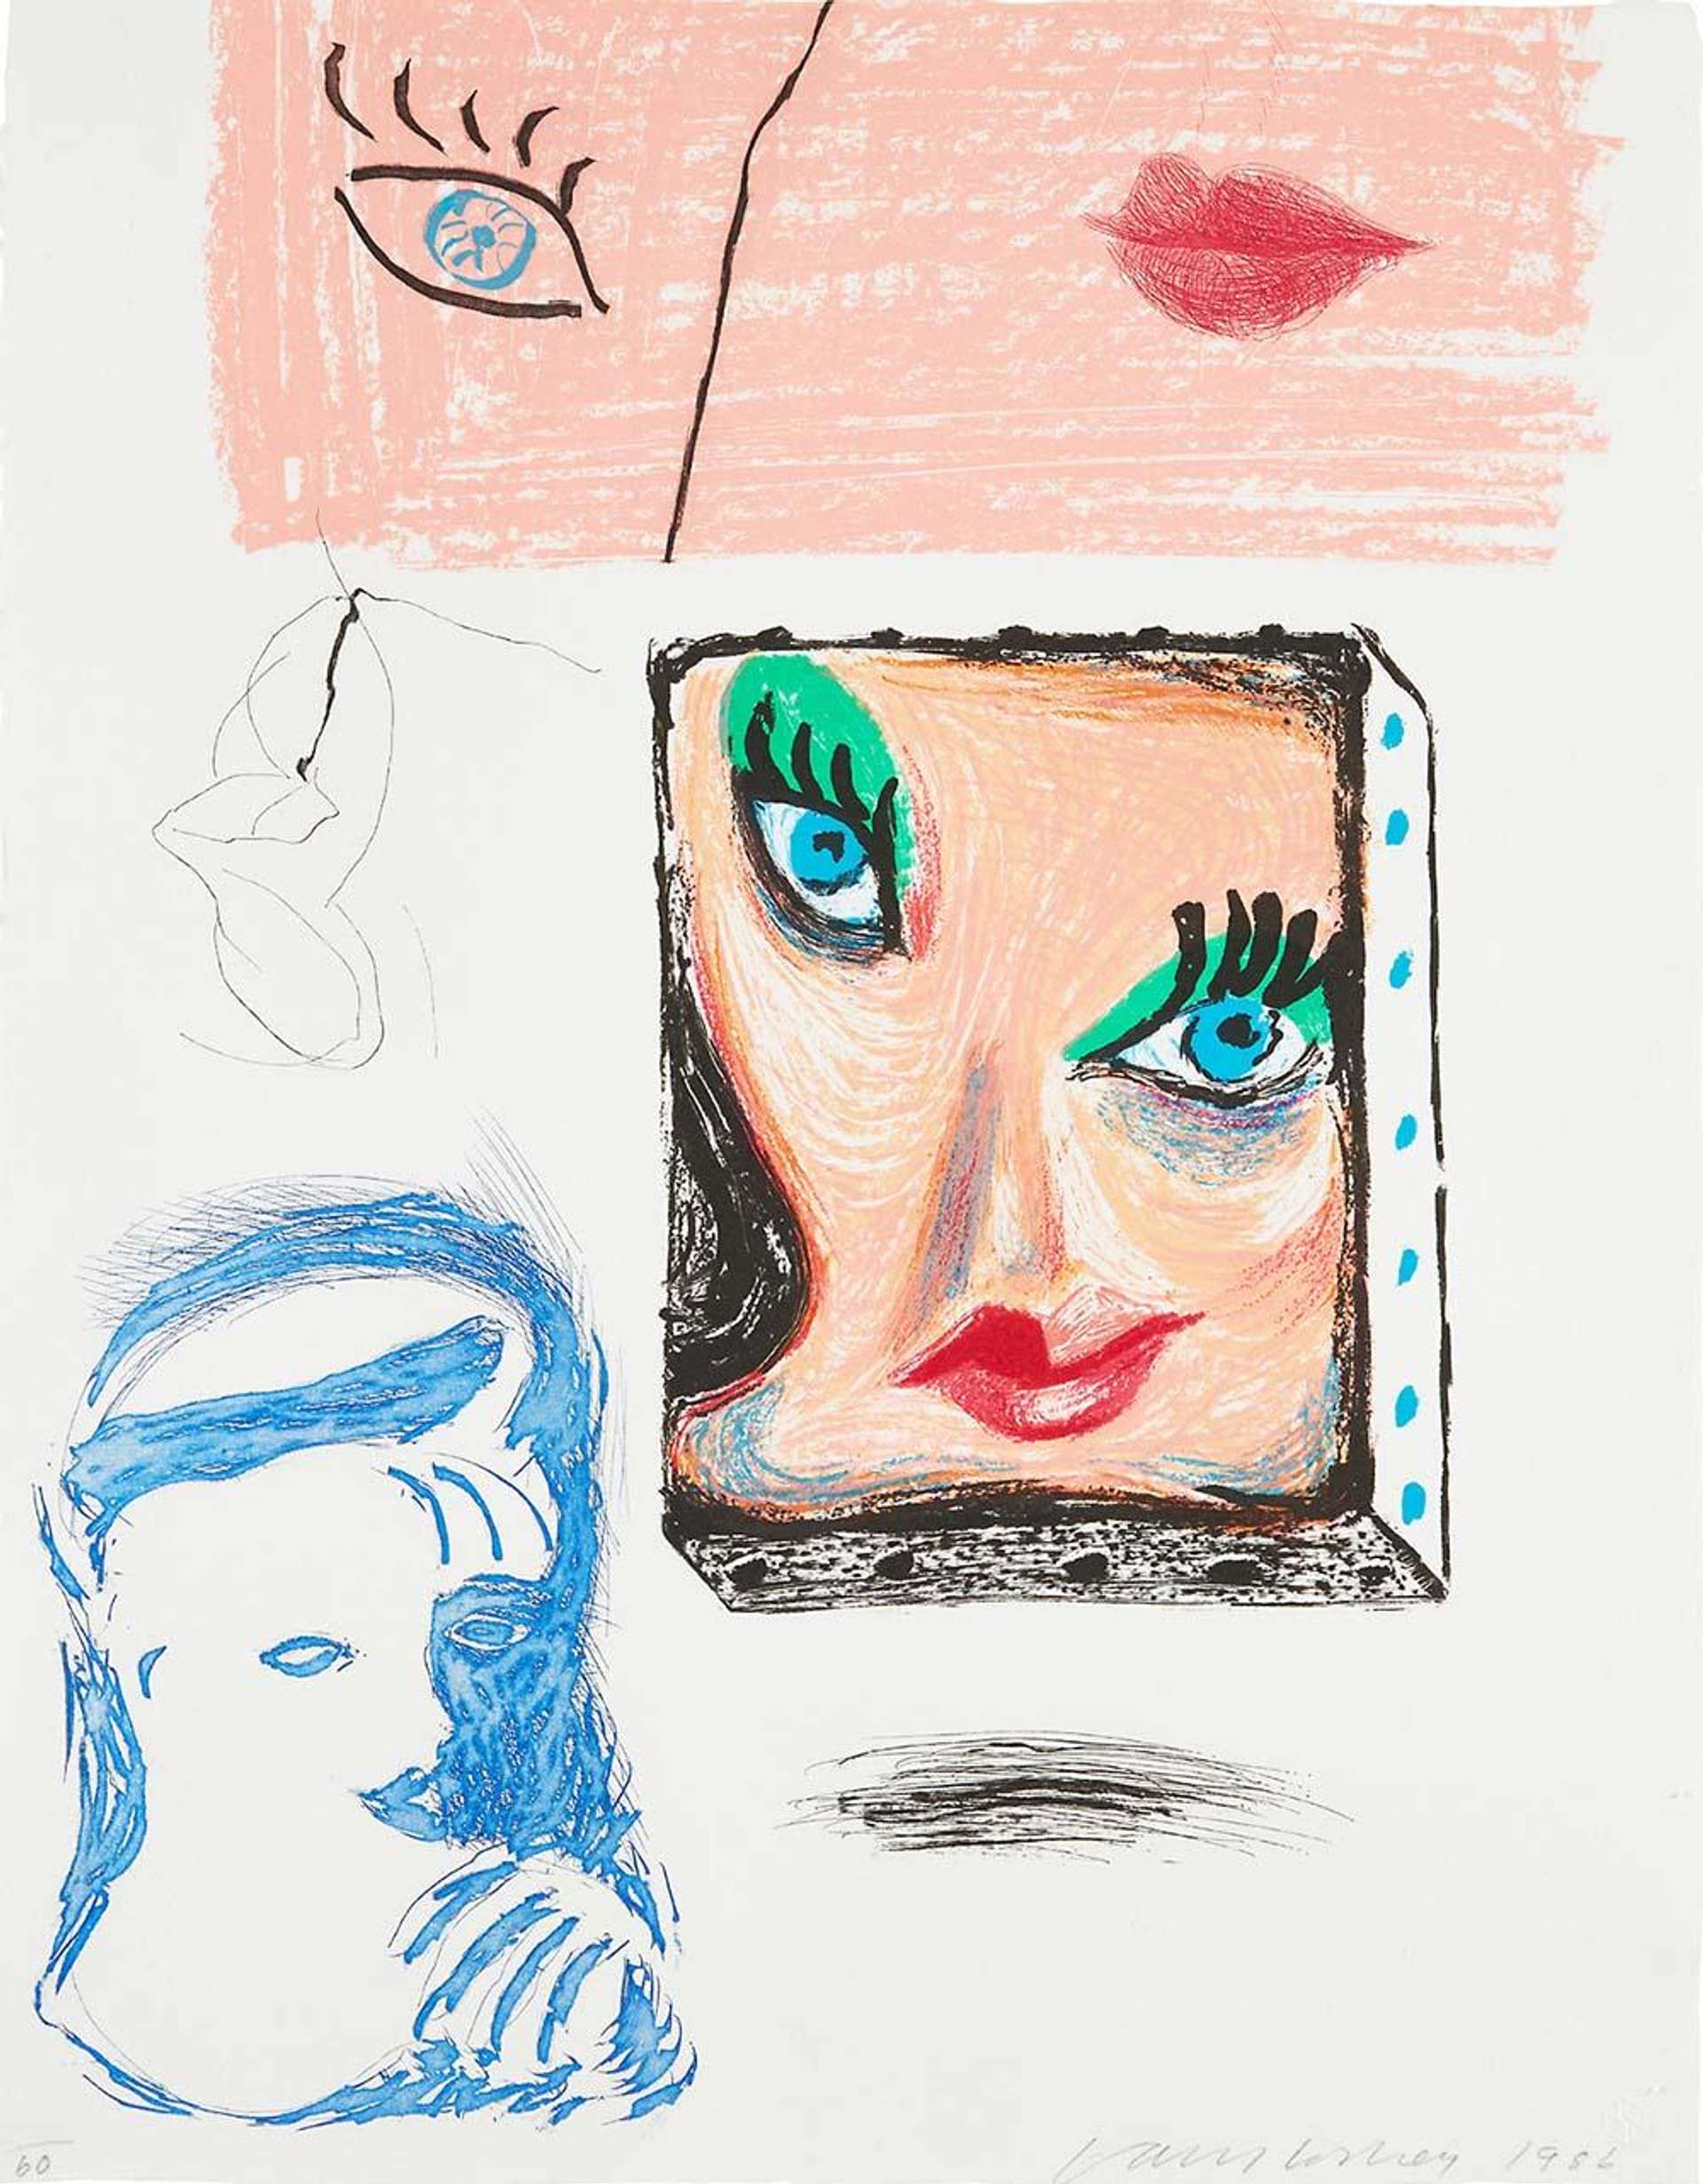 In this work we find a number of drawings of his close friend and muse Celia Birtwell; the image is dominated by a floating canvas, shown in 3d and casting a shadow below, which depicts a close up of Birtwell’s face in a style recognisable from the Moving Focus series. Here her features are given a Cubist treatment, her wide blue eyes skewed and highlighted in green, showing this to be a close study for the work An Image Of Celia. Below the canvas is a shadowy portrait in blue where she is less identifiable and above is a pink shaded part where just an eye and a pair of lips are shown.